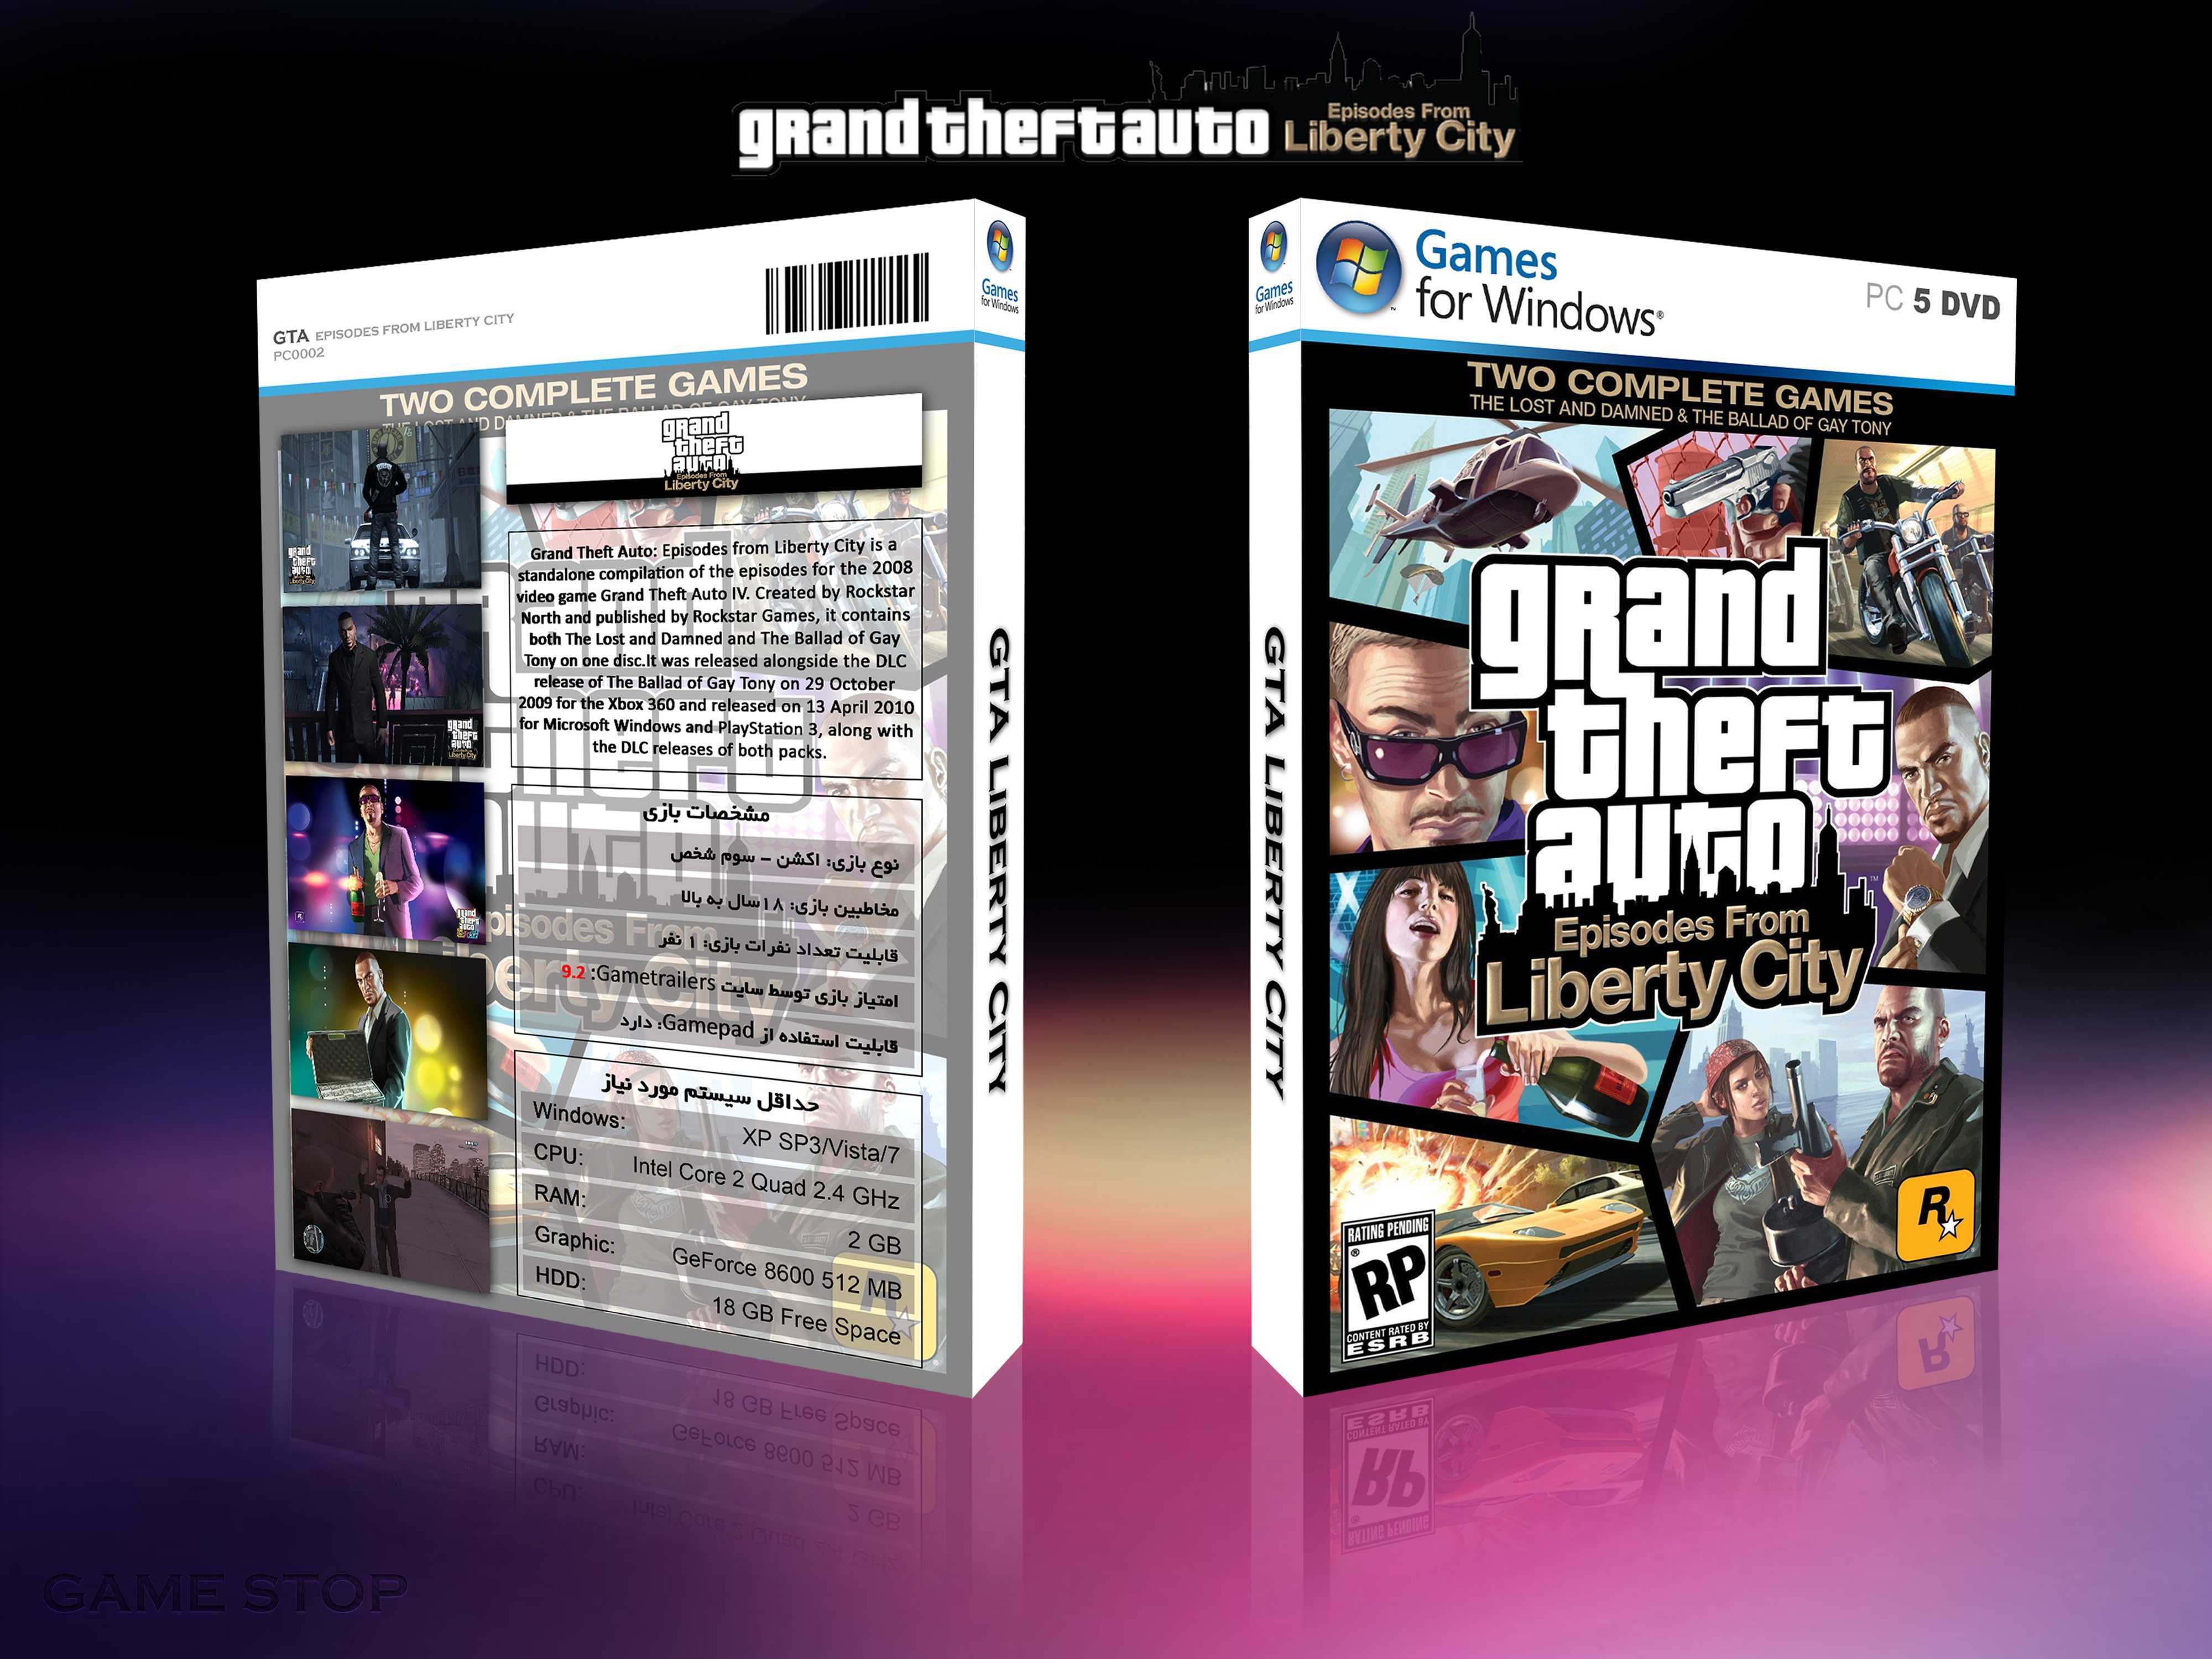 Fix problem with gta iv episodes from liberty city, won't start!